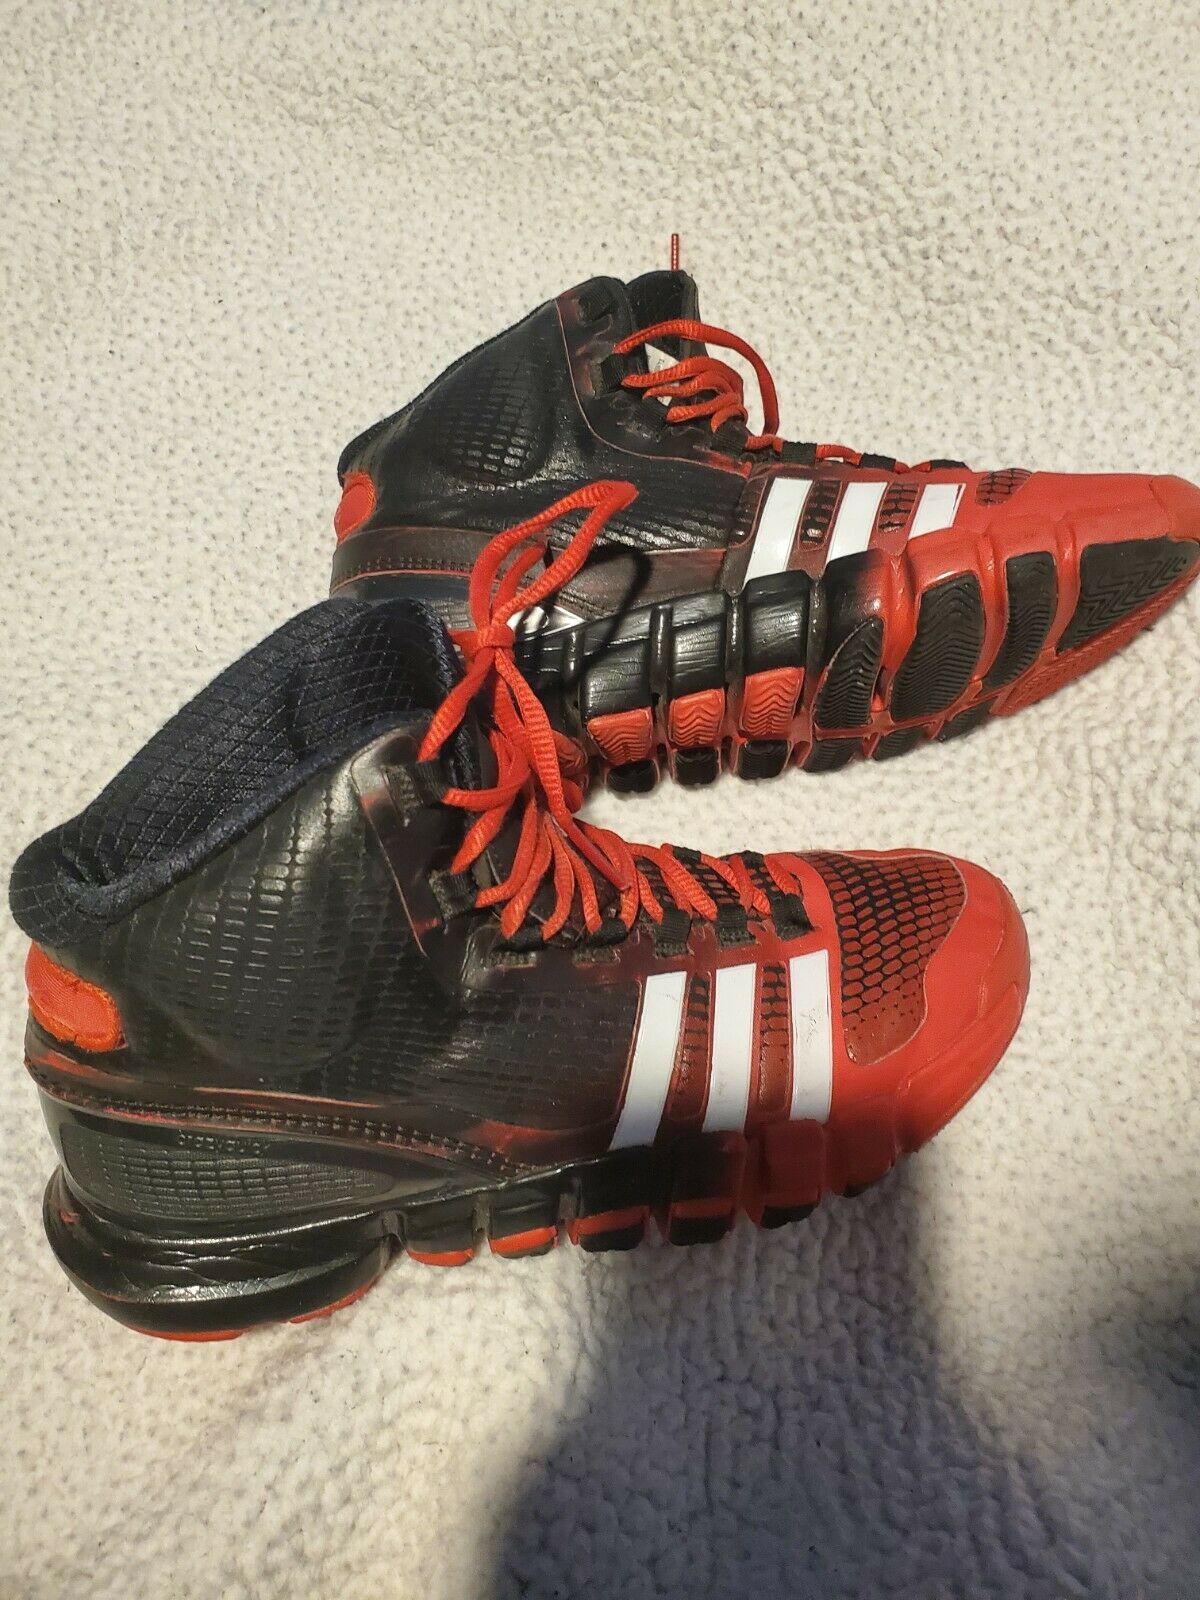 Adidas Youth Shoes Size 7Y Basketball Sneaker red